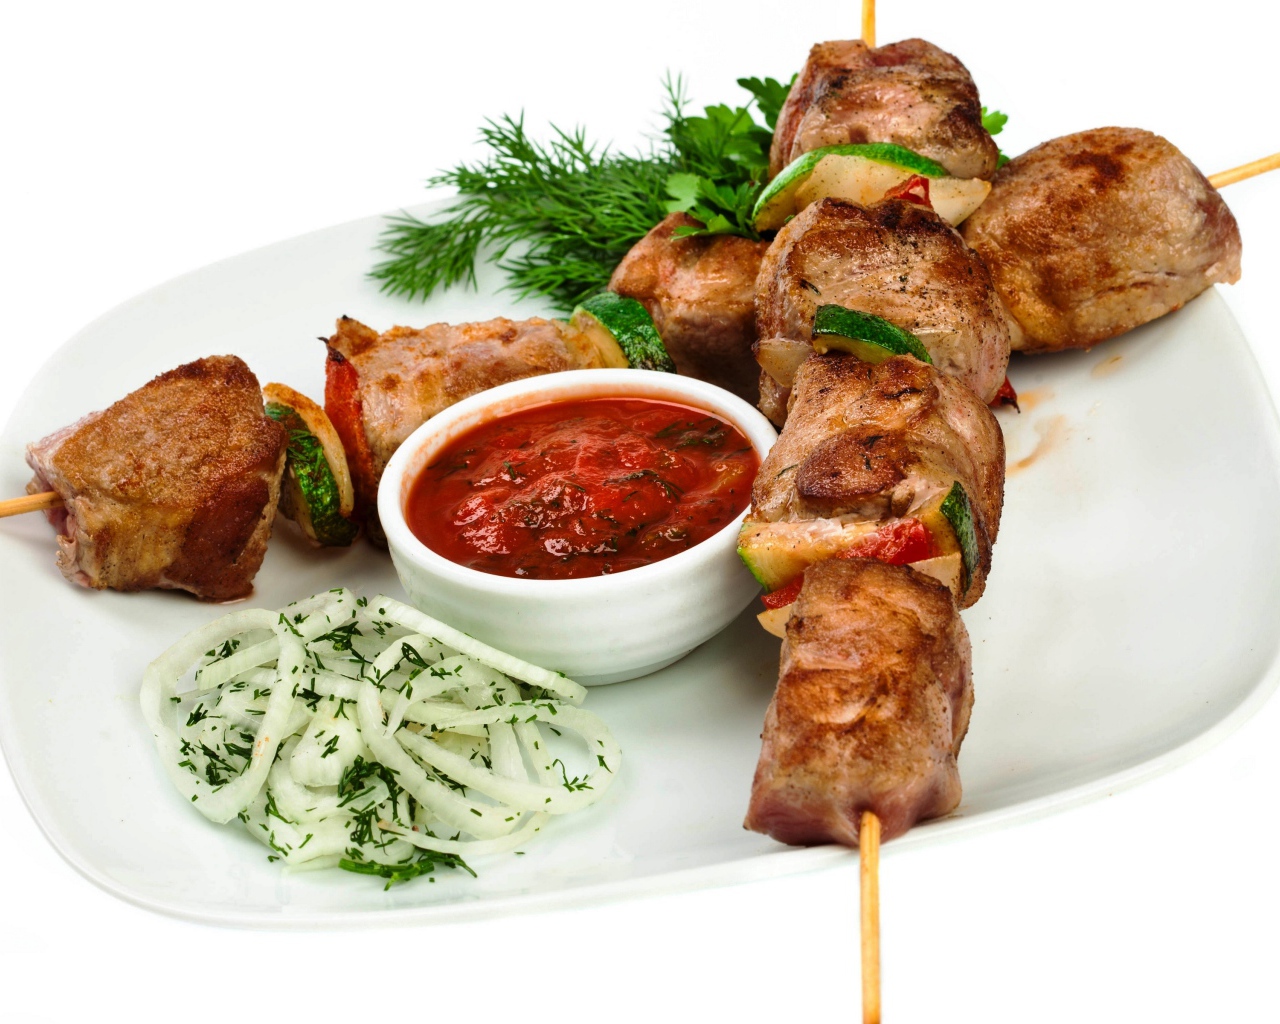 Skewers on a white plate with sauce, herbs and onions